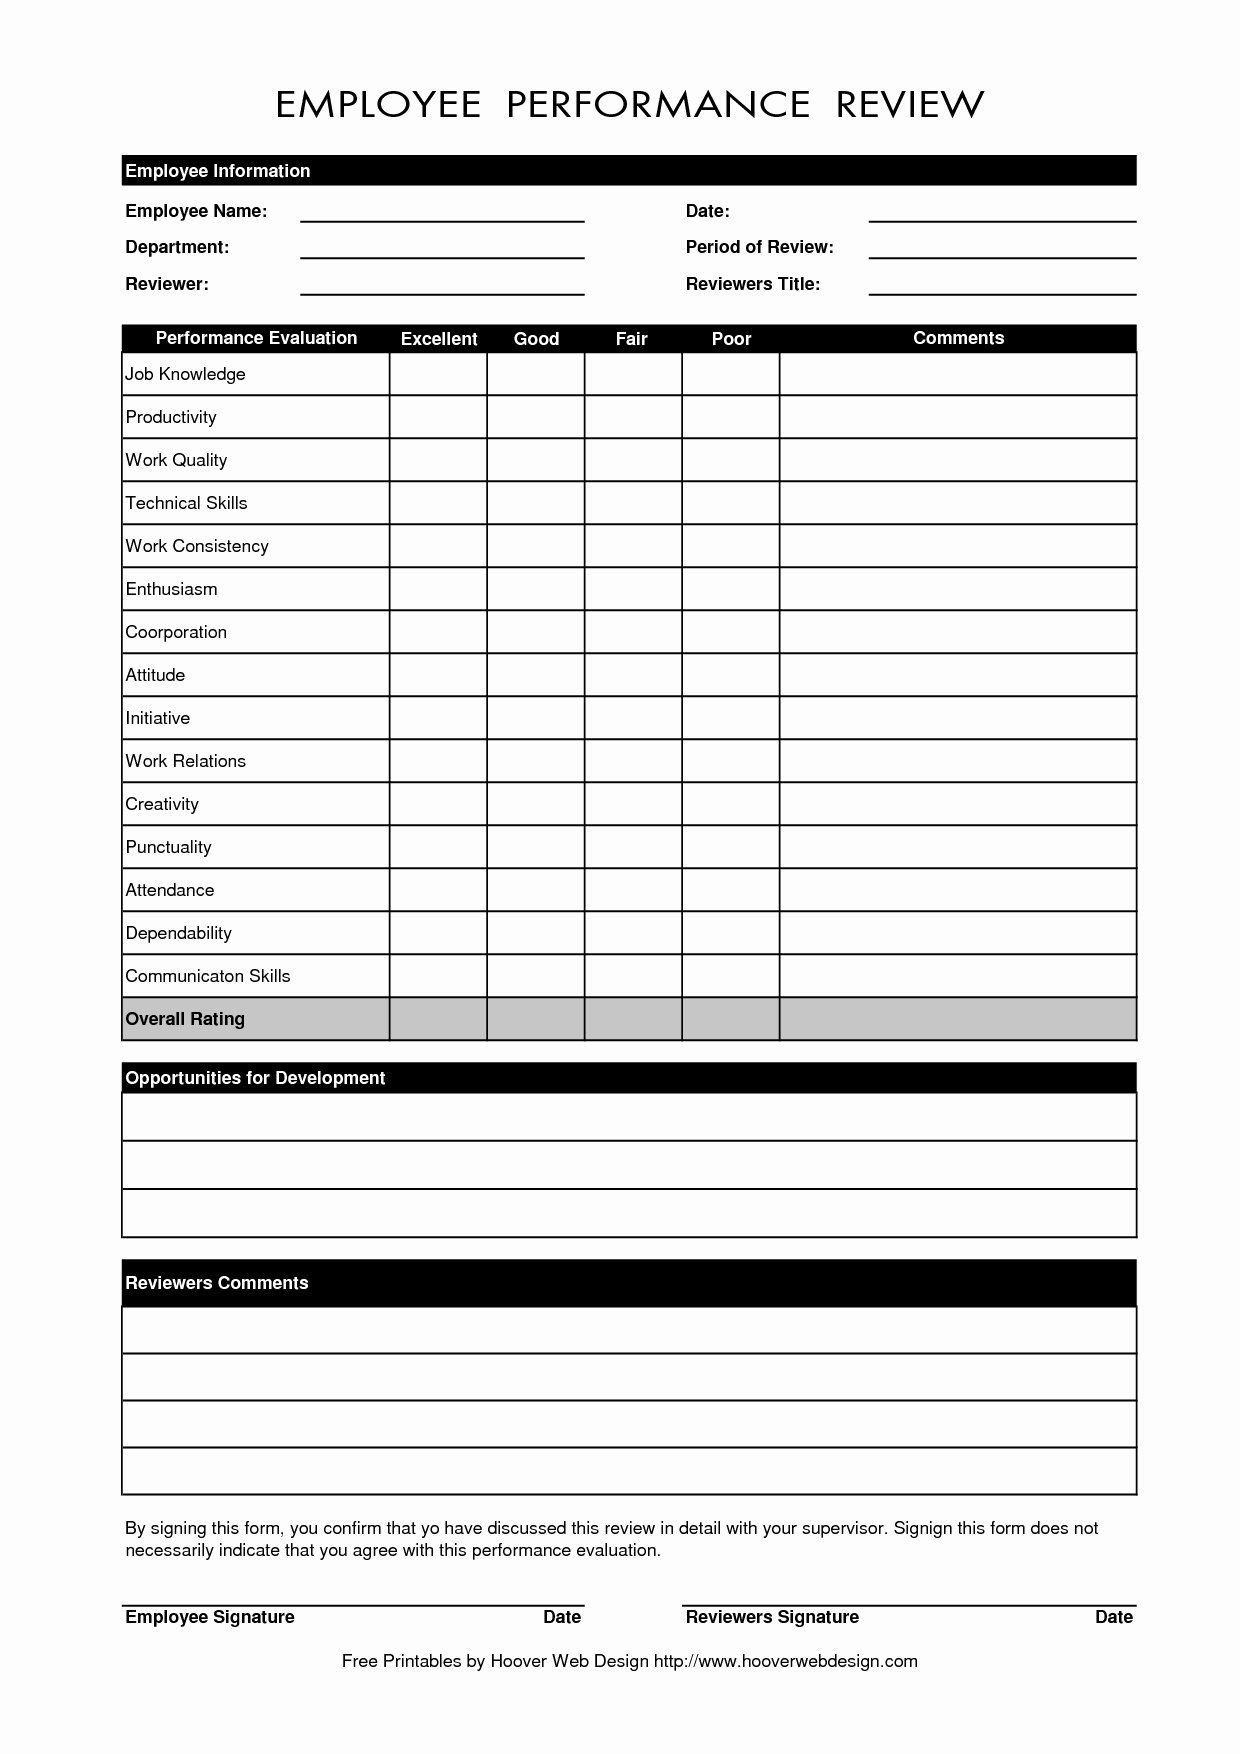 Employee Performance Tracking Template Excel Elegant How to Track Employee Performance Spreadsheet Spreadsheet